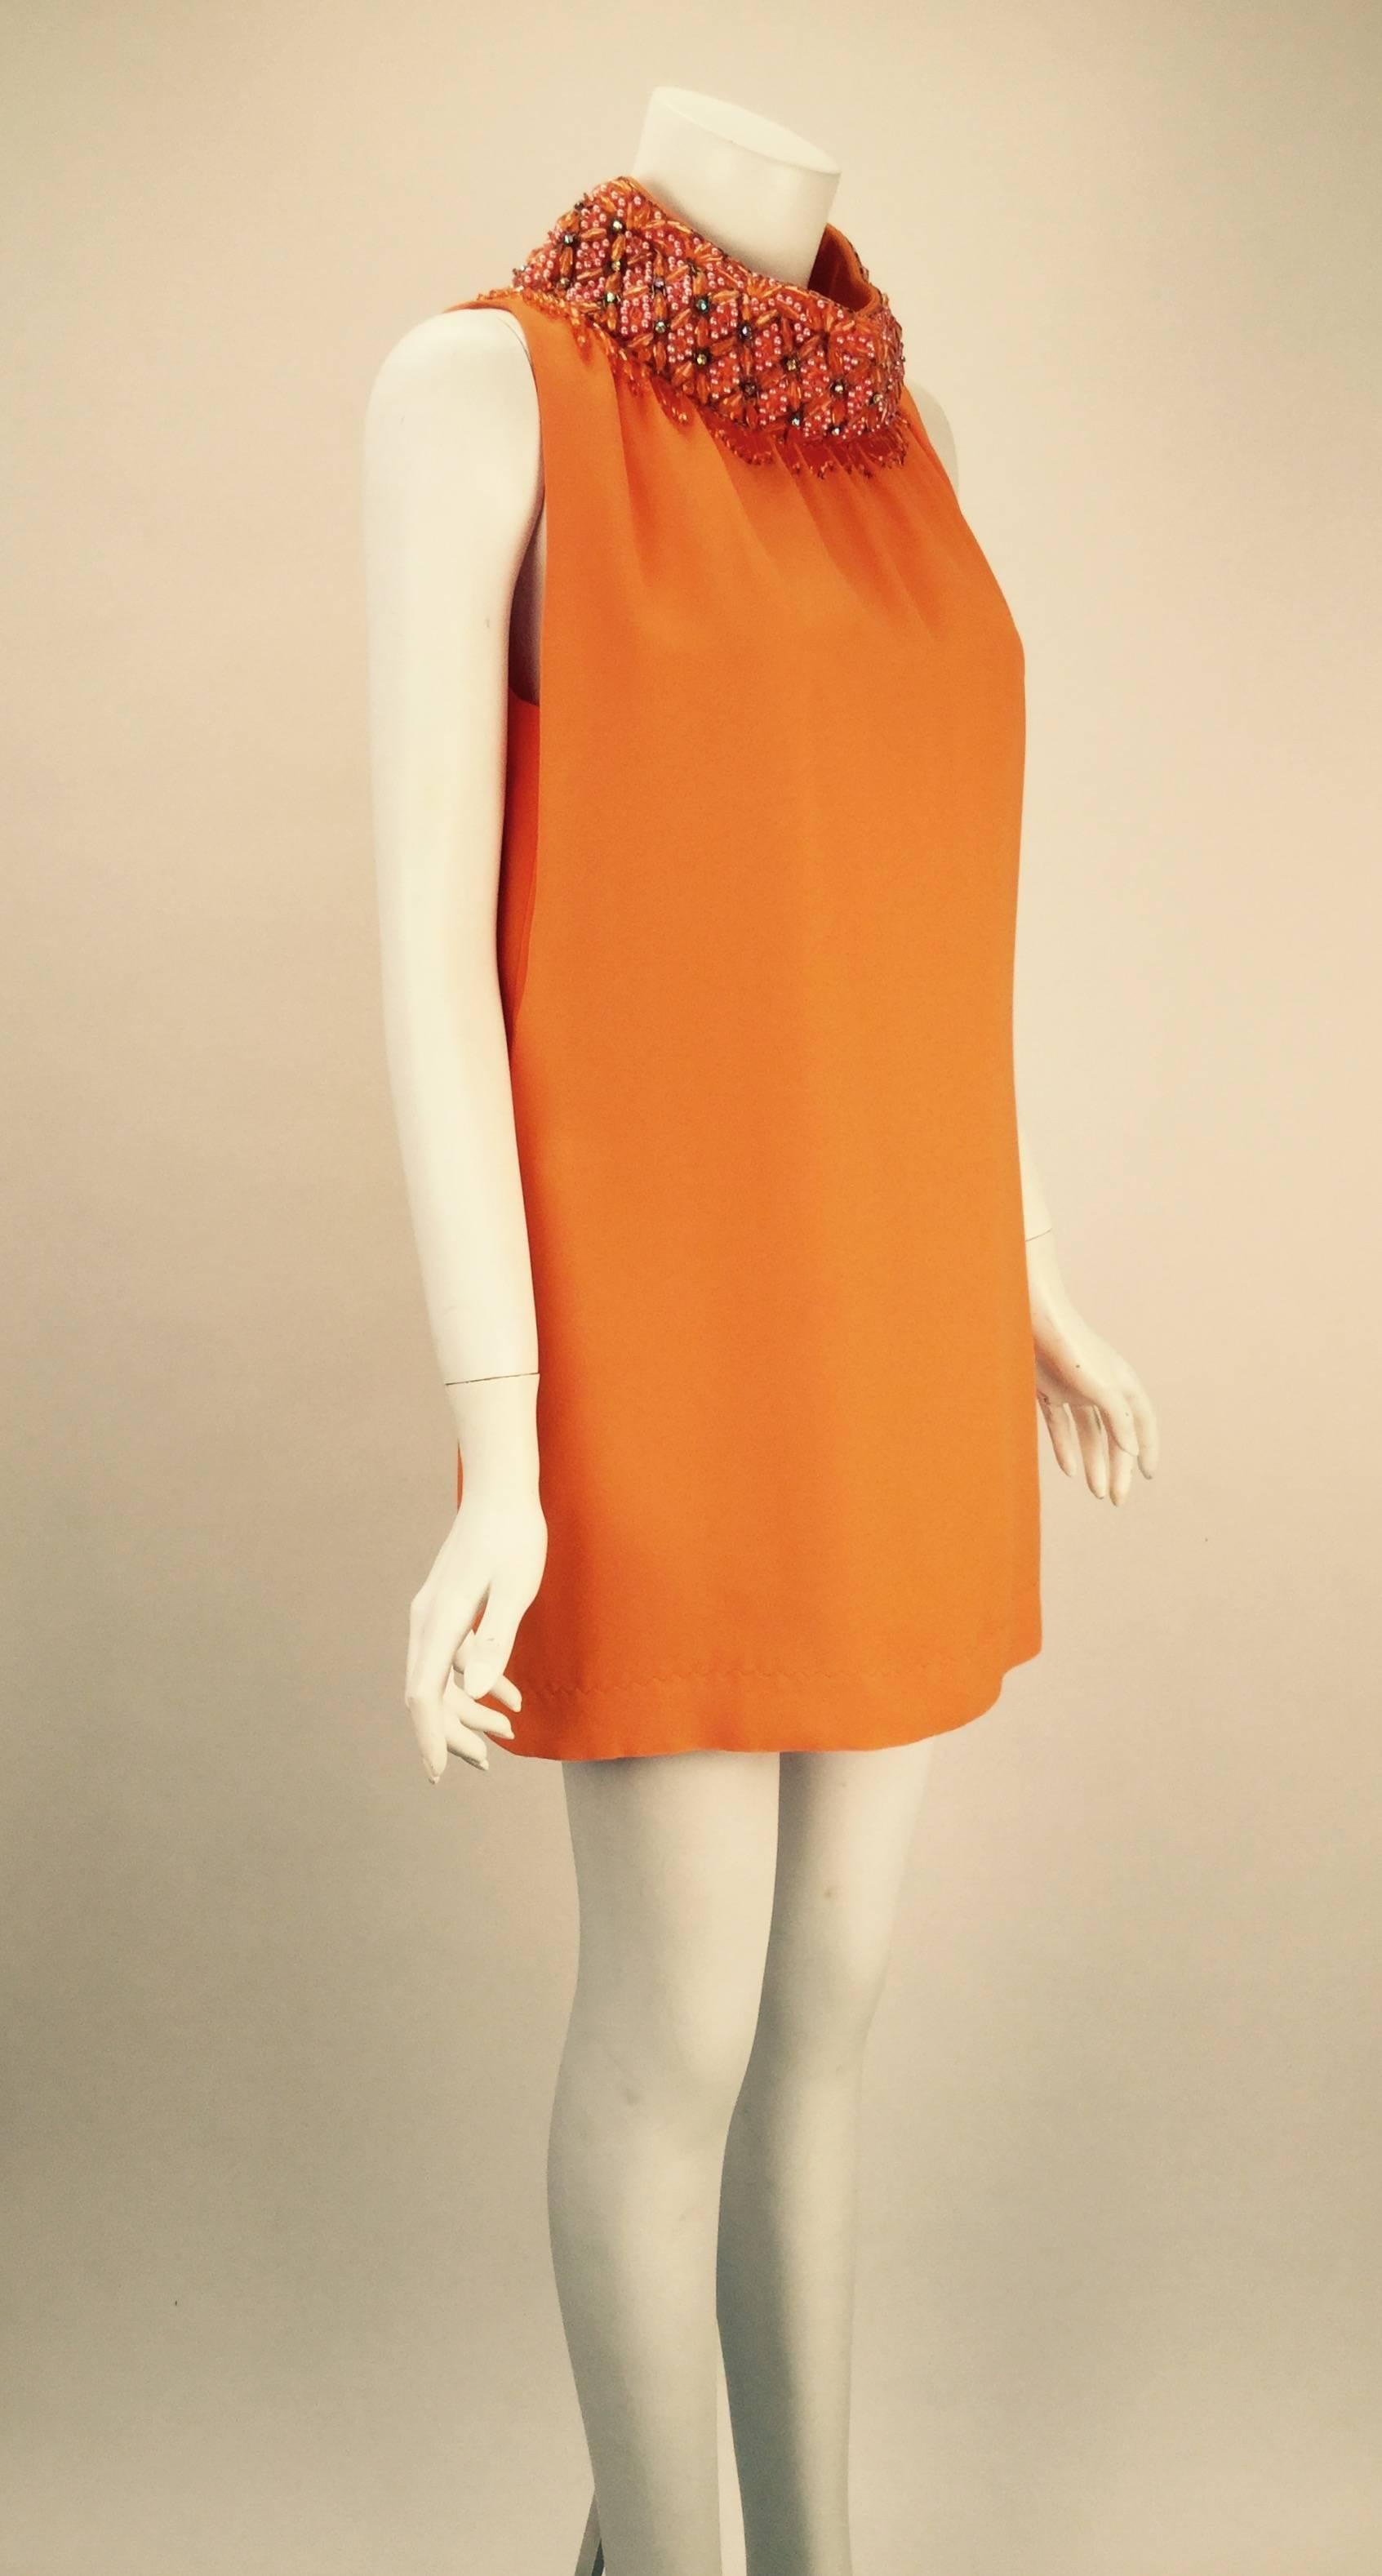 Fantastic and unique 1960s Gino Charles by Malcolm Starr orange ultra mini dress with a wonderful 